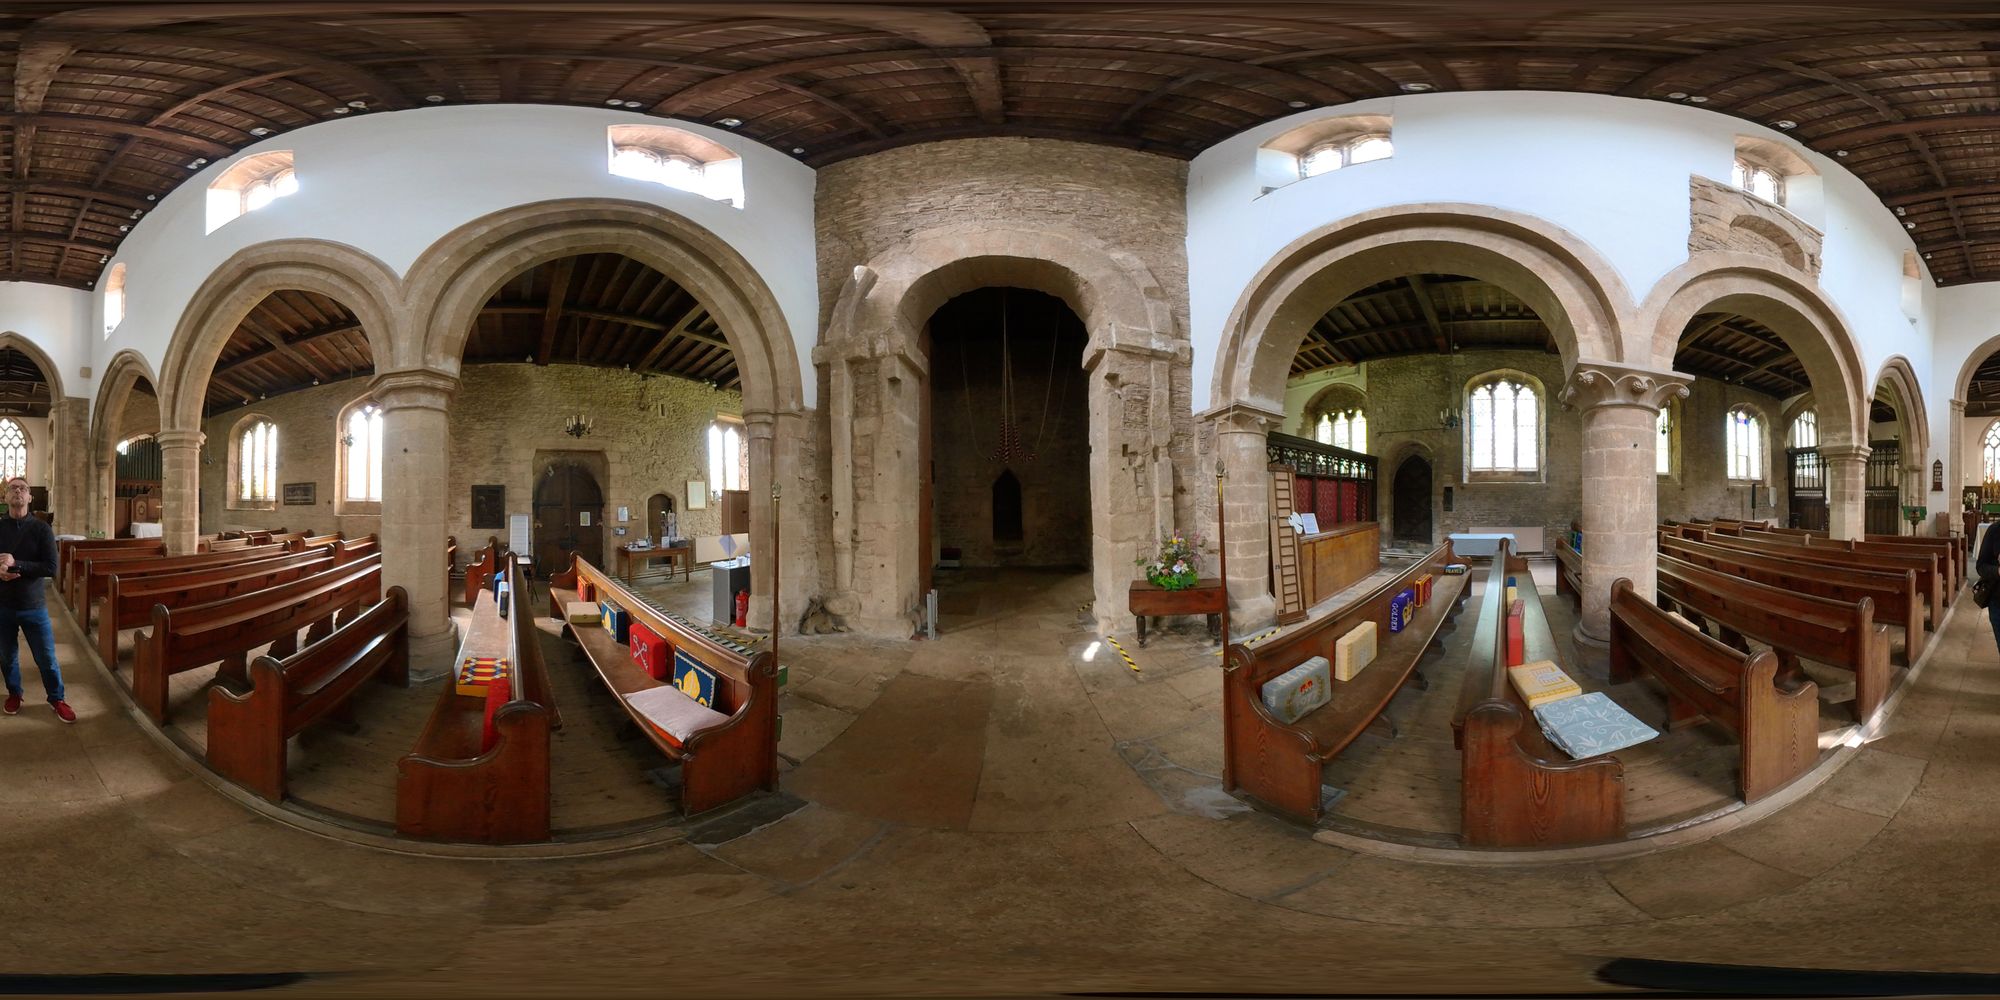 Be there: St. Andrew Brigstock in glorious VR